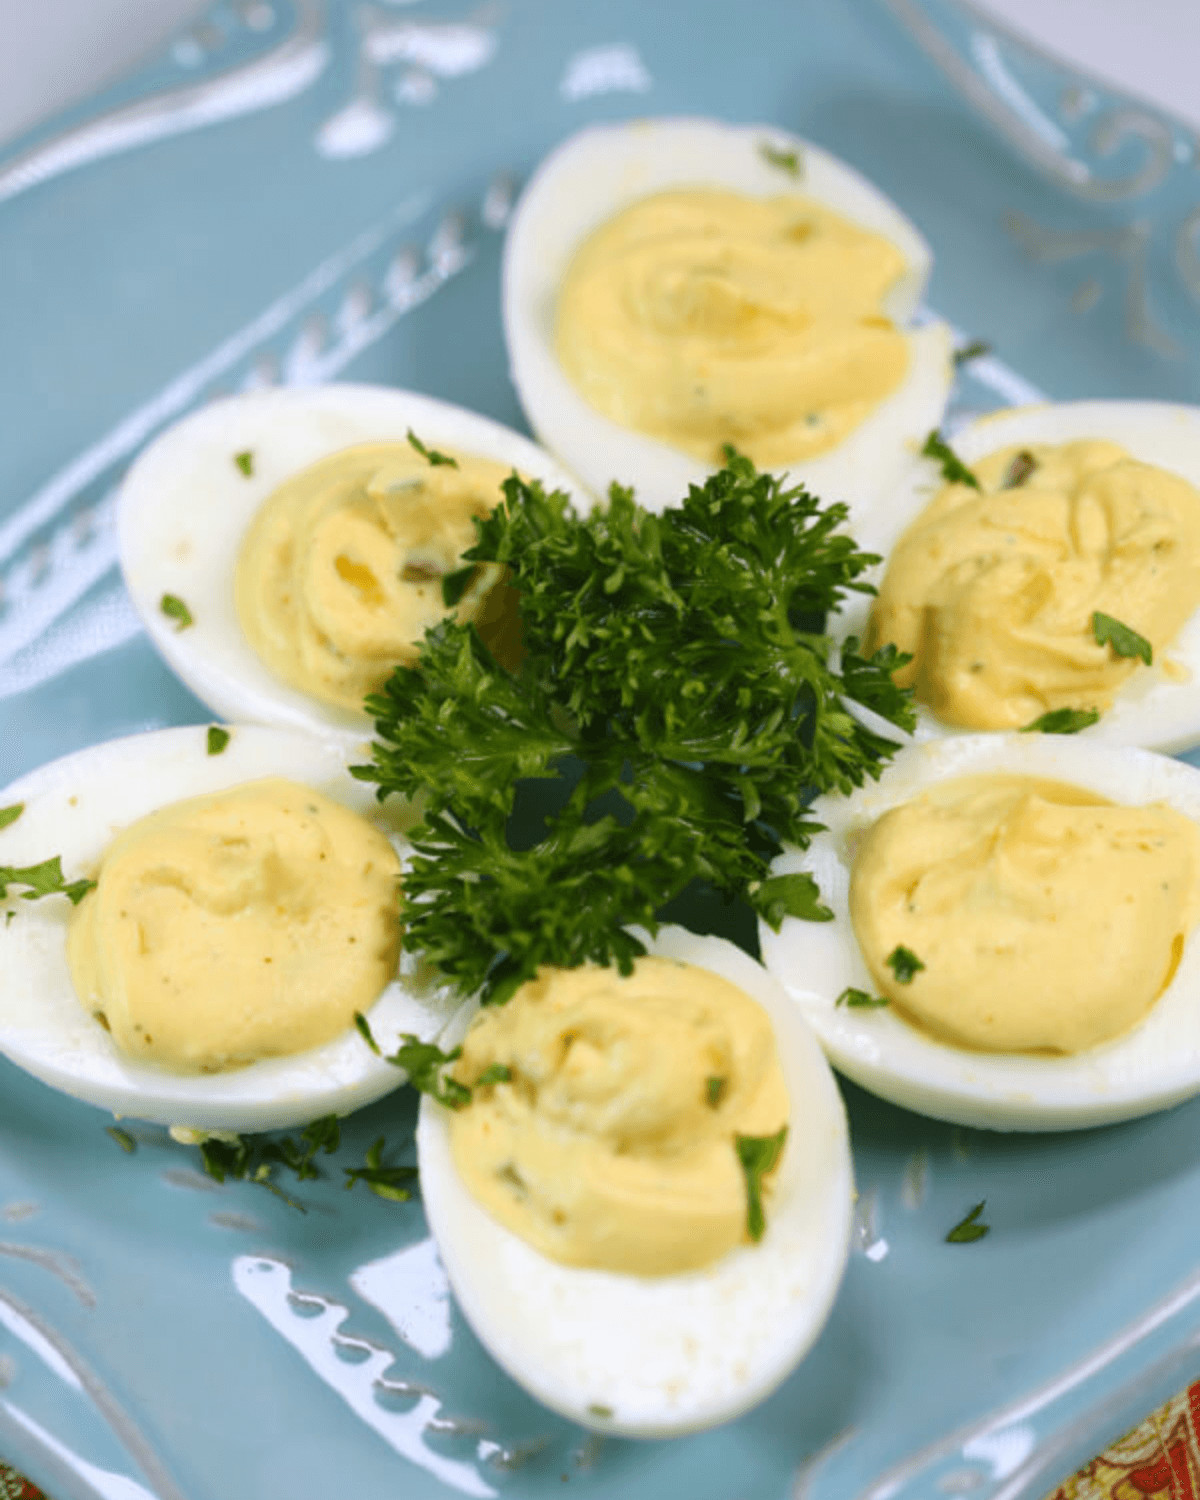 Platter of southern deviled eggs with relish, garnished with parsley.